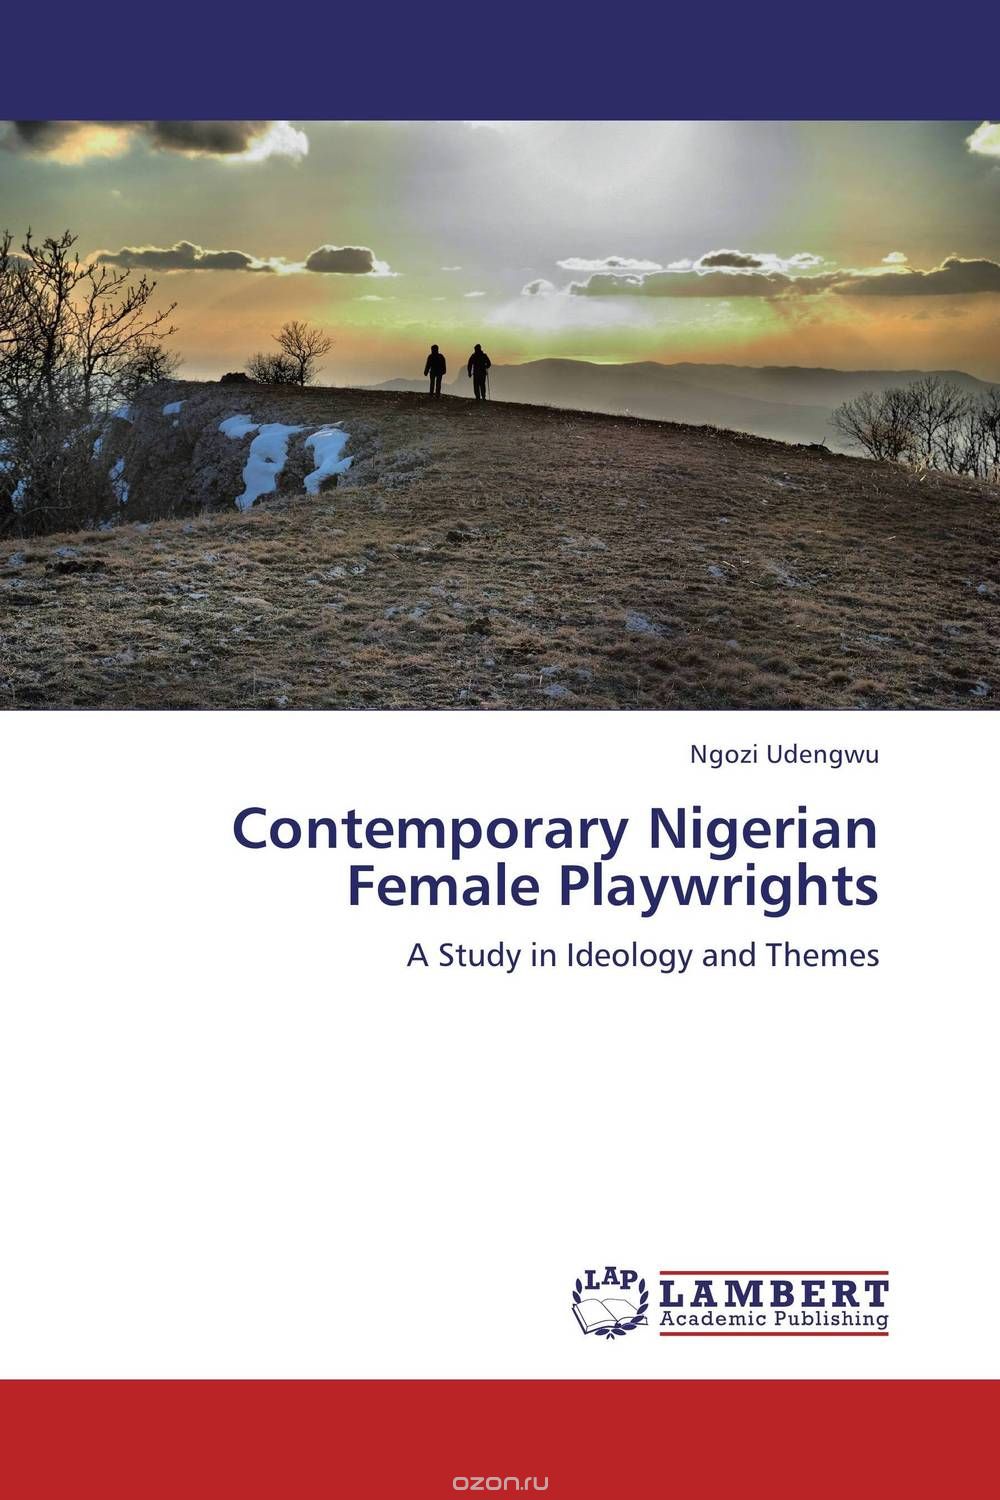 Contemporary Nigerian Female Playwrights